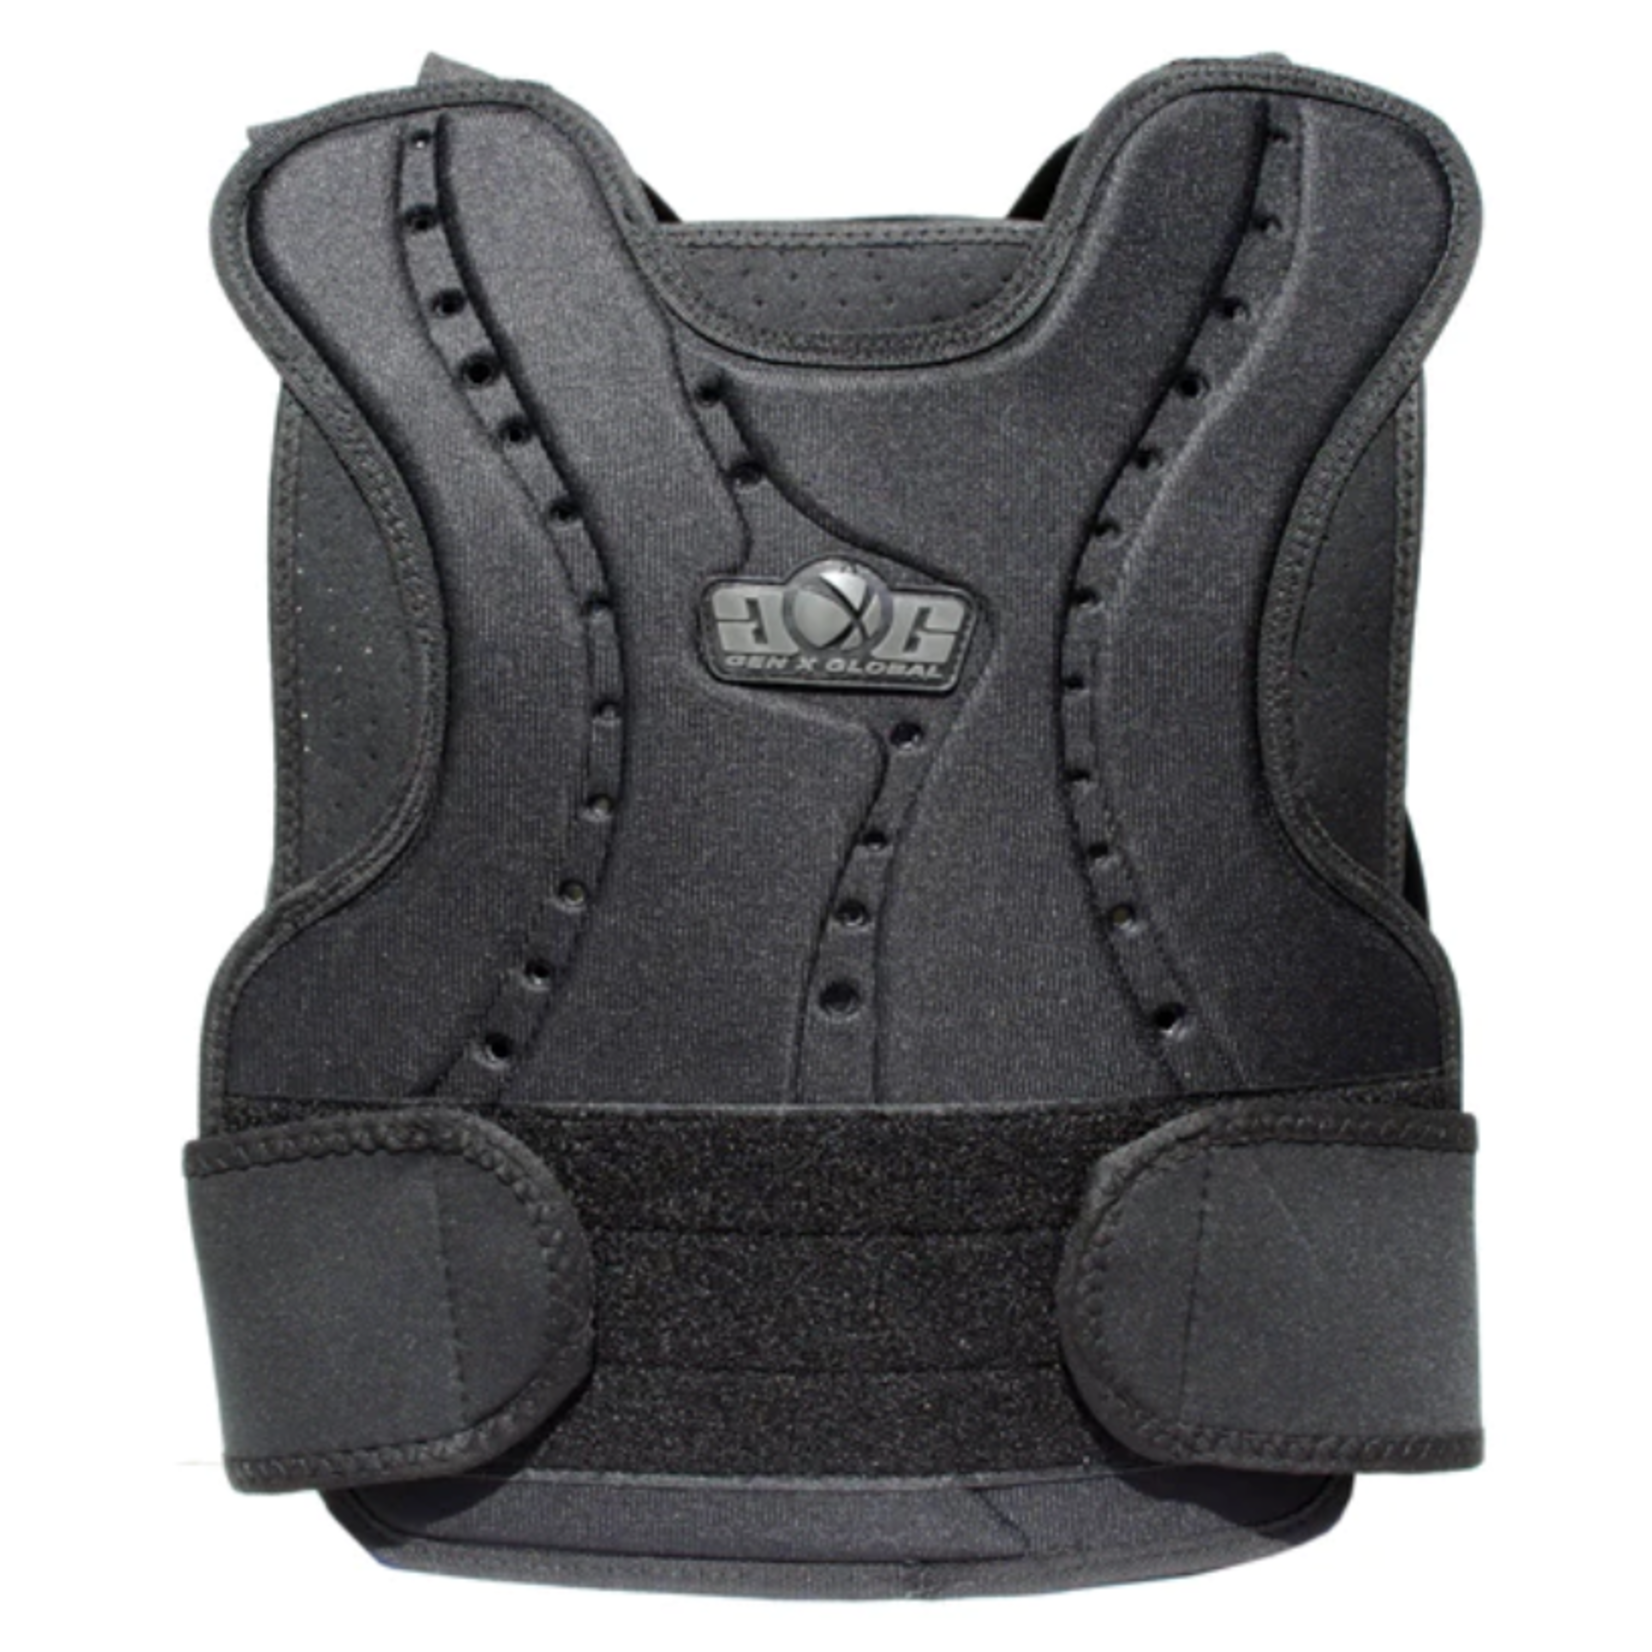 GxG Sports GXG Chest Protector